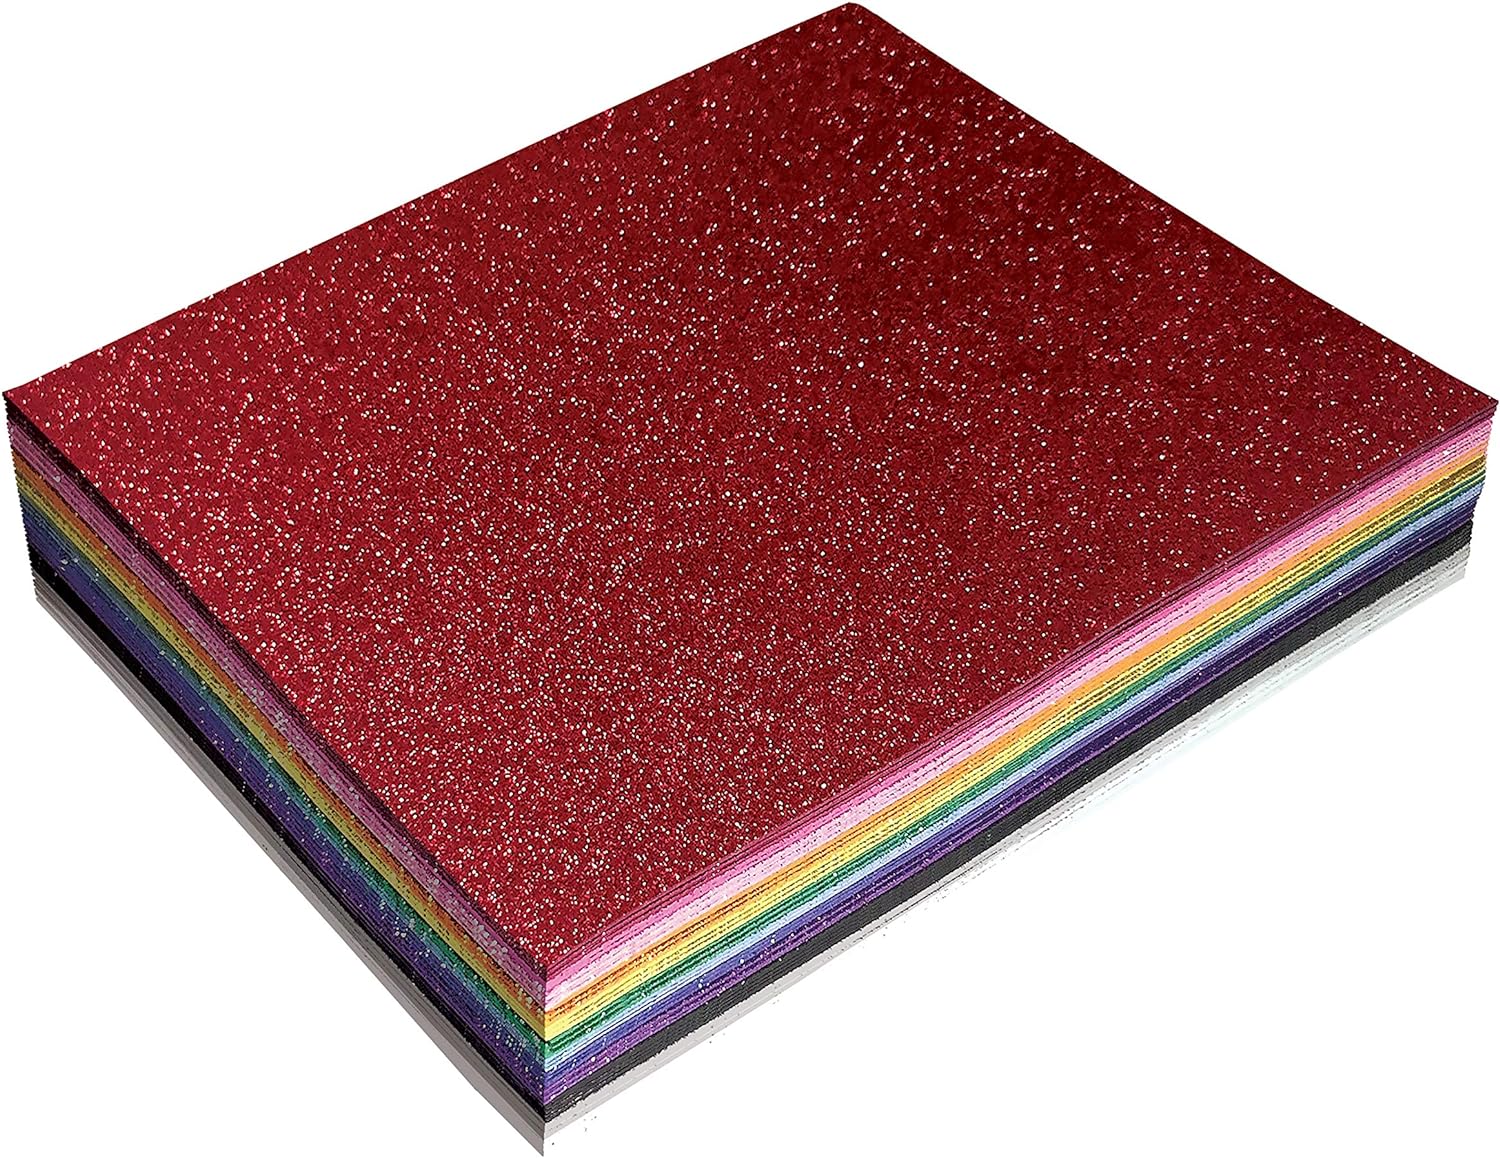 36 Pack Glitter Foam Sheets 9x12 Inch Assorted 12 Colors For Arts And Crafts 36 Sheets By PAIDU